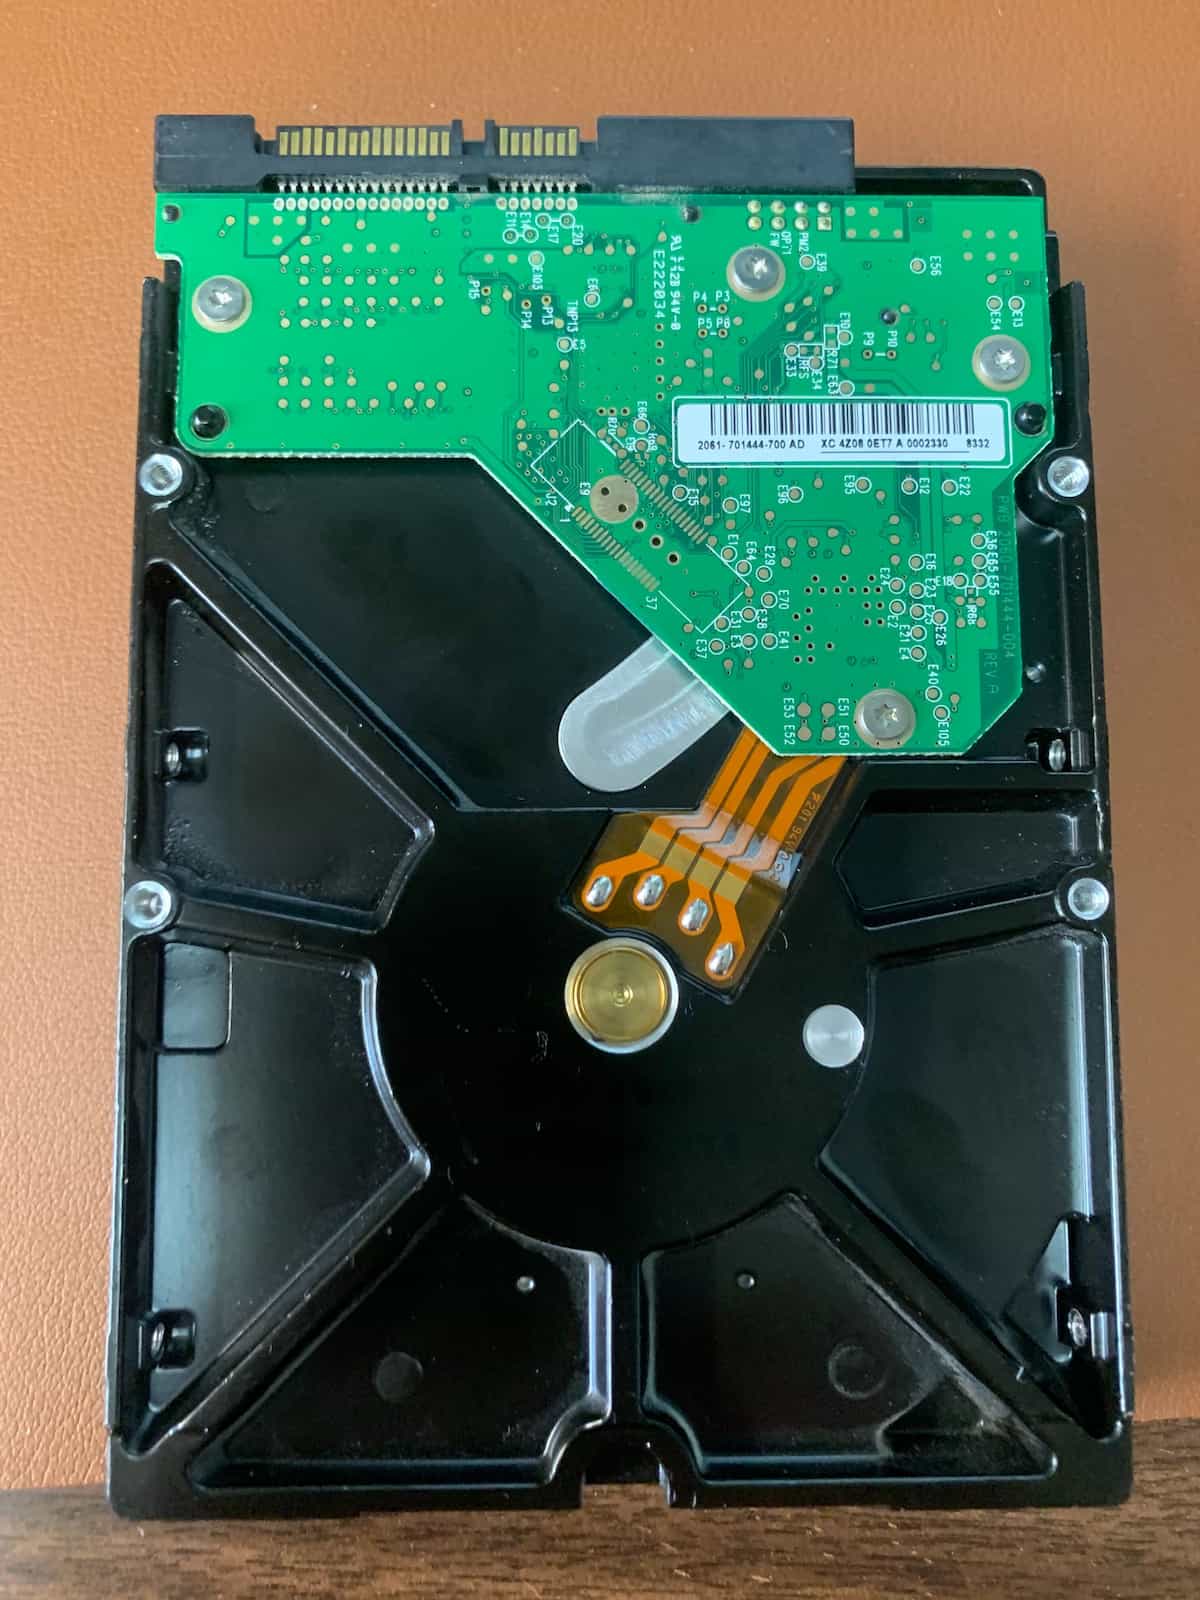 PCB of Clicking WD3200AAKS Western Digital Hard Drive